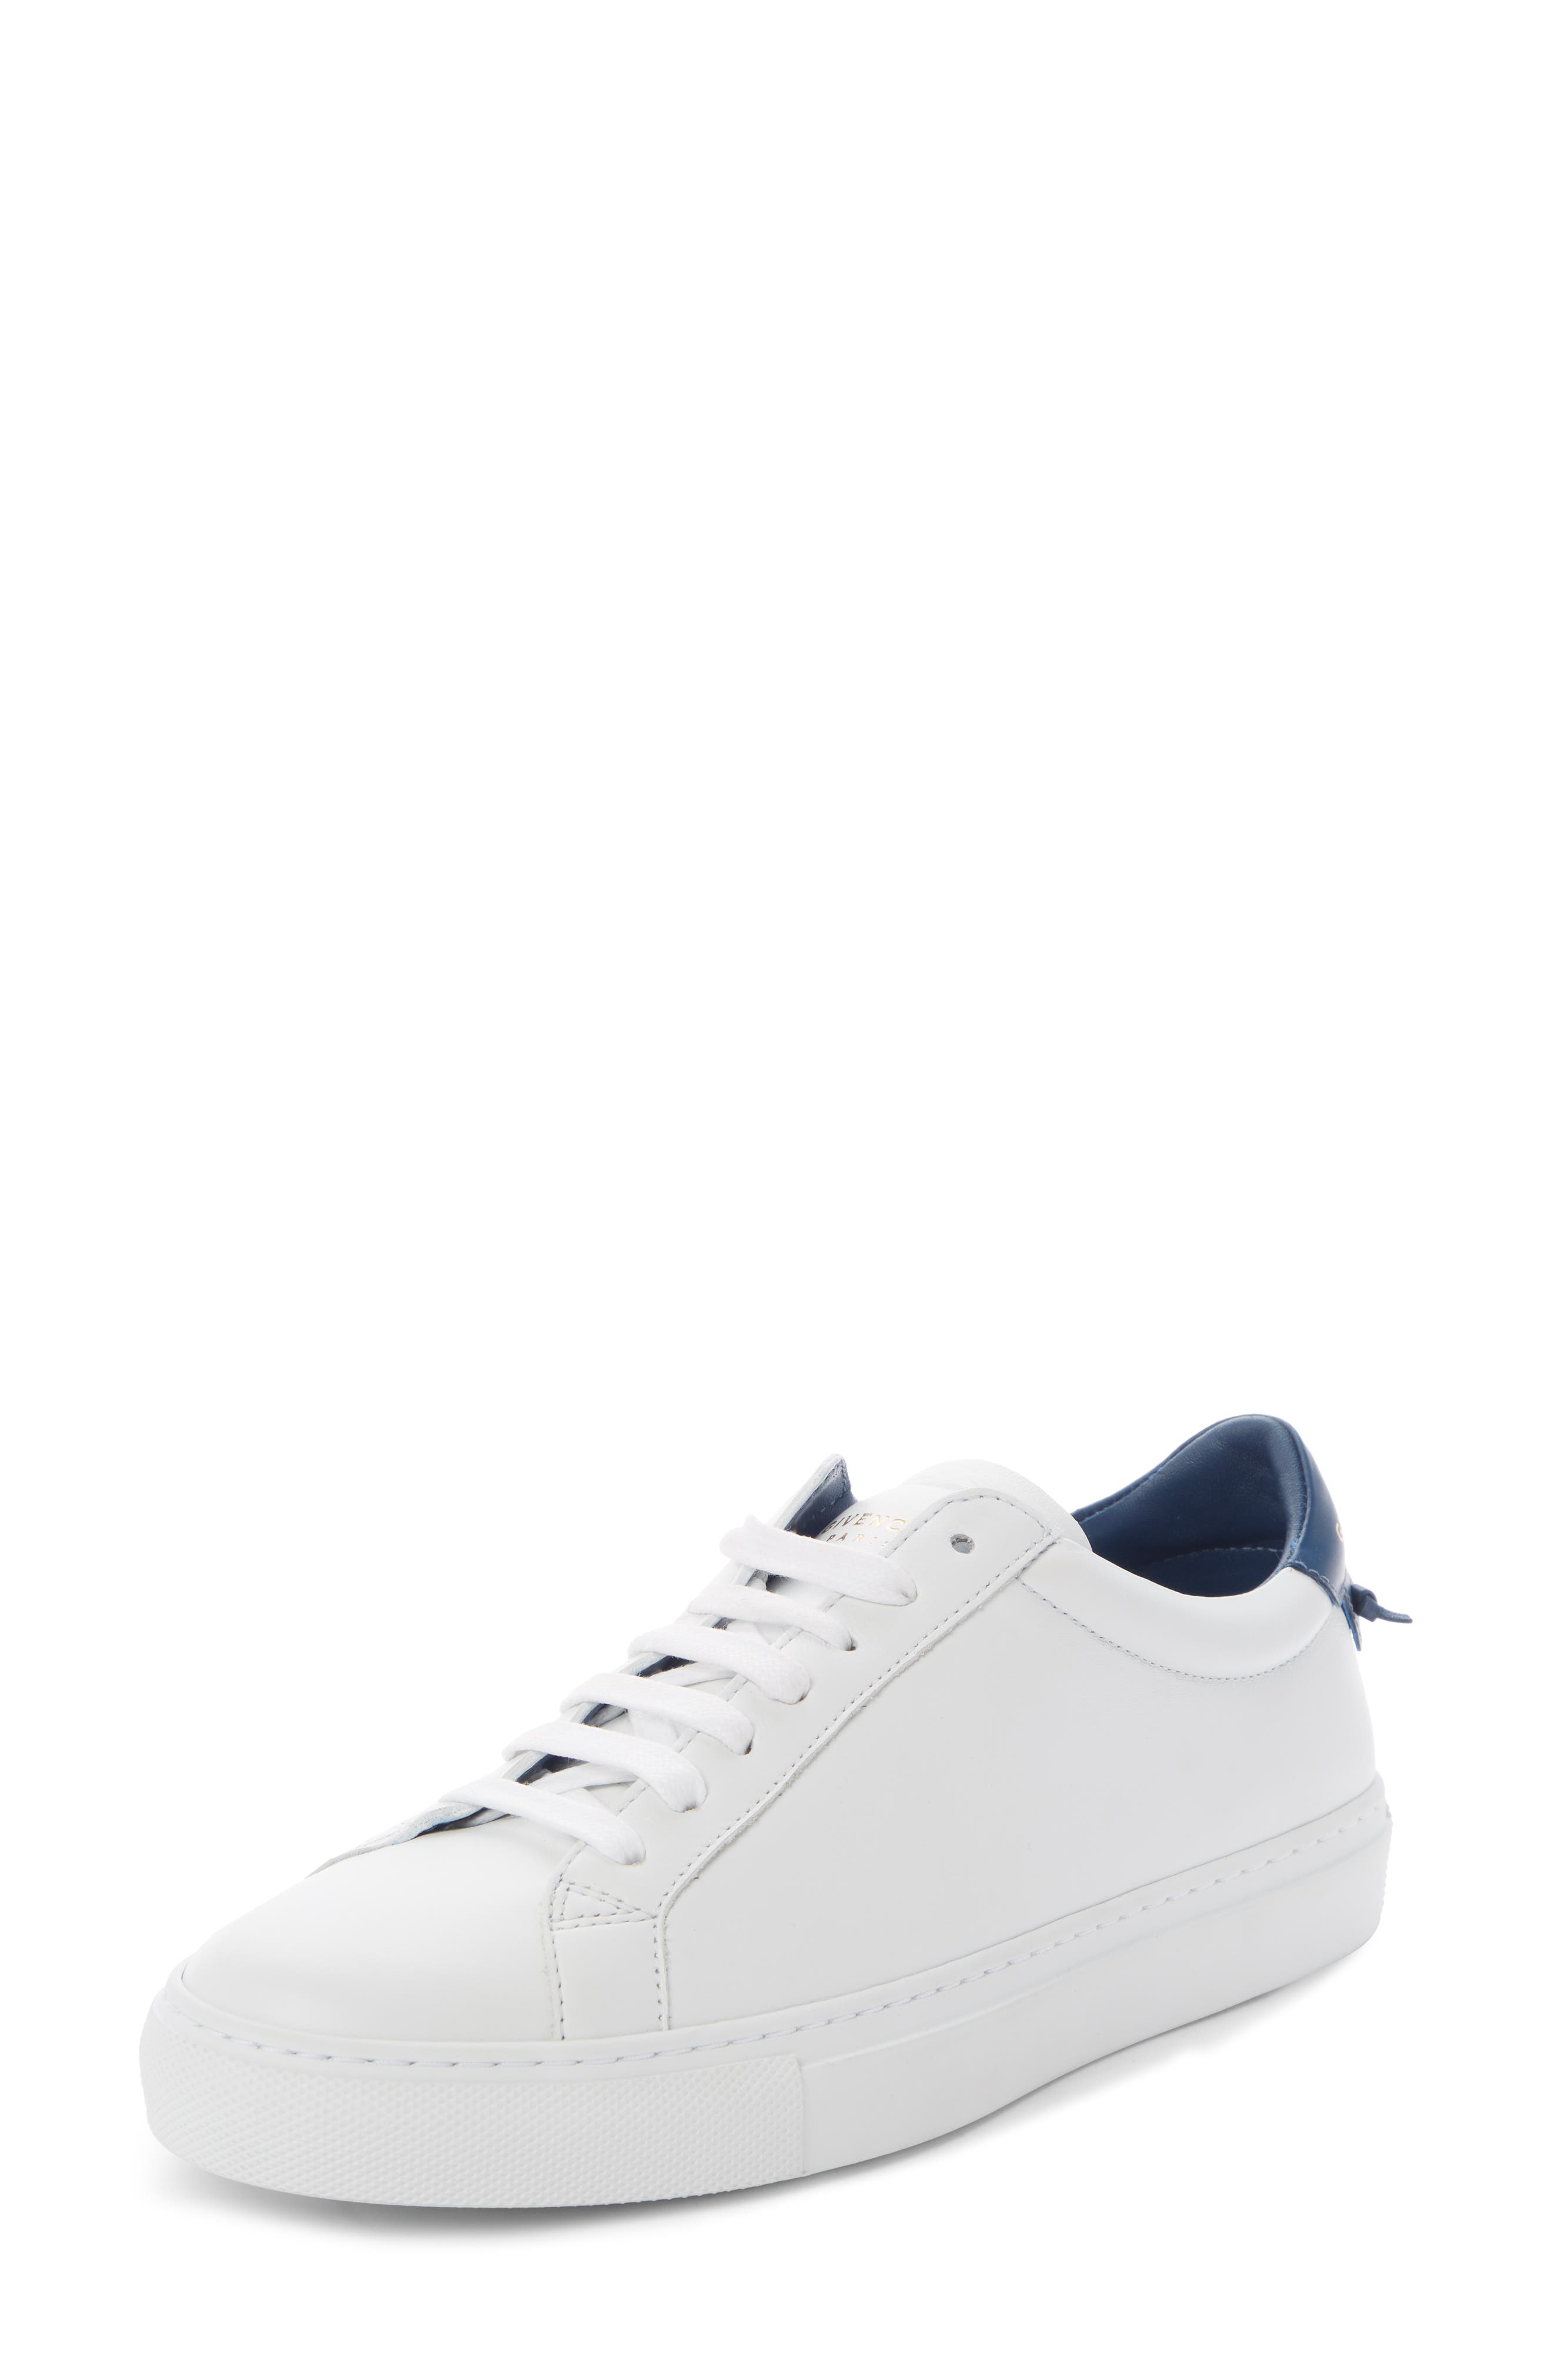 givenchy sneakers nordstrom